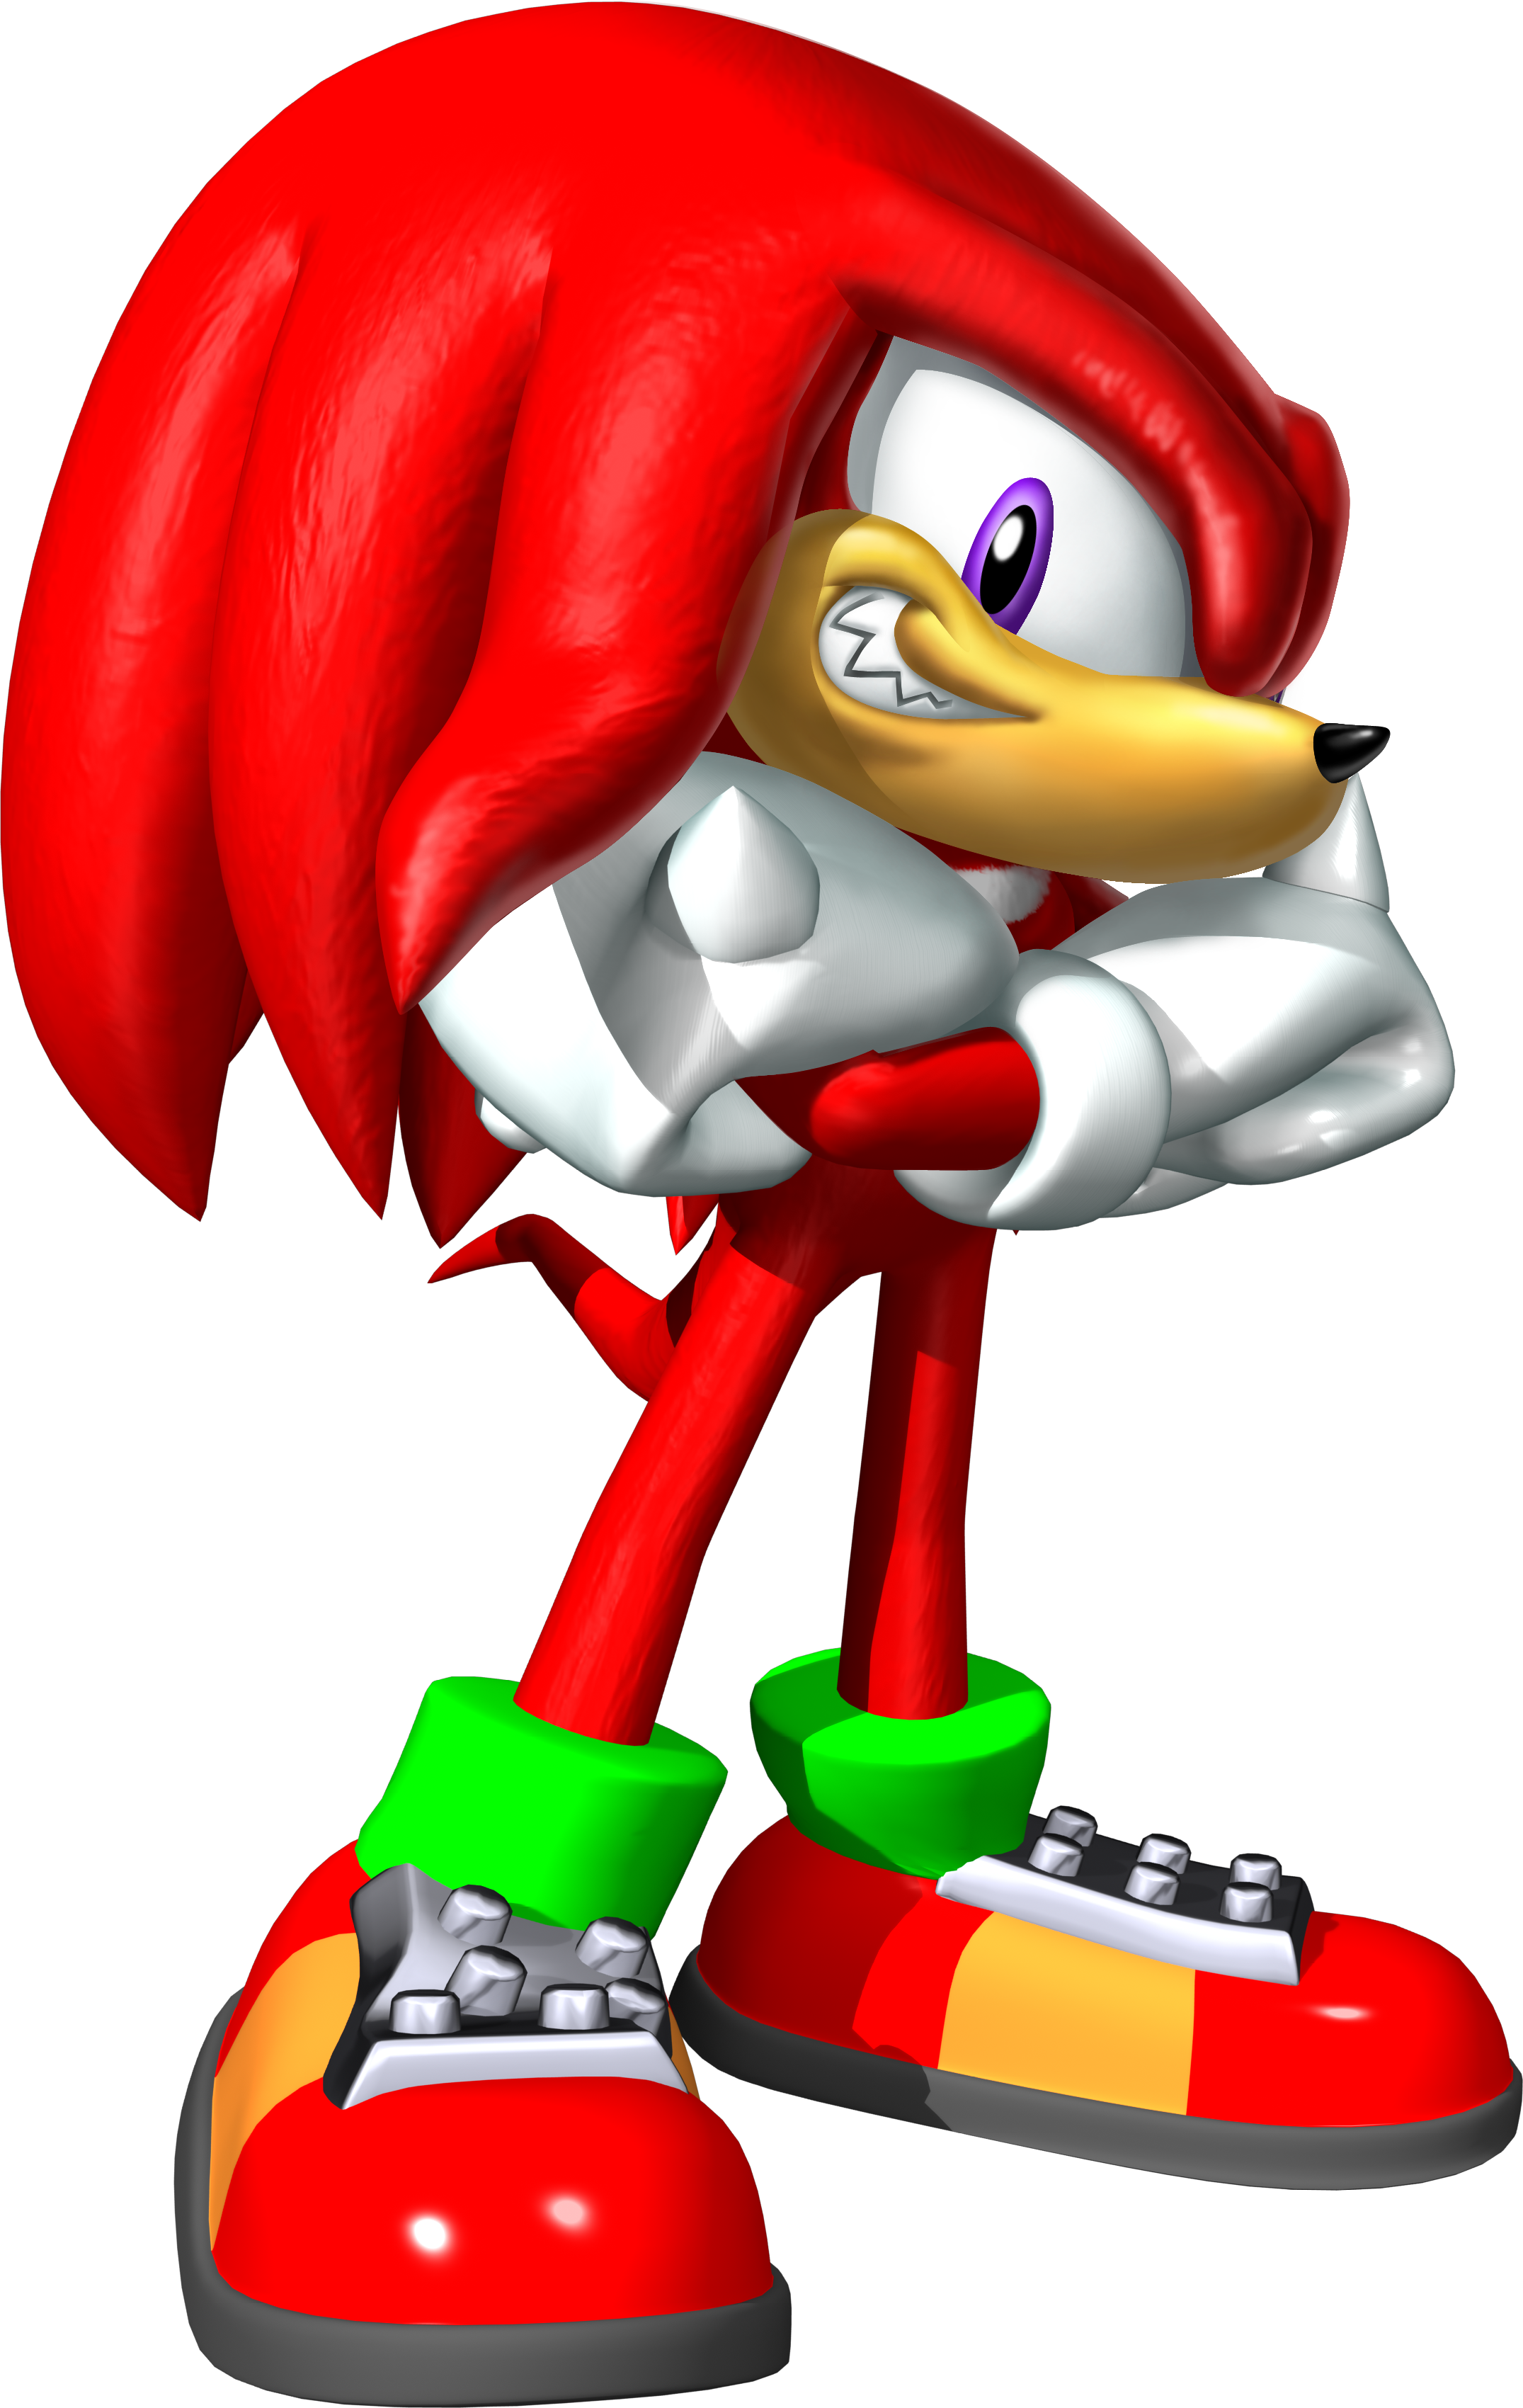 Image - Knuckles 48.png - Sonic News Network, the Sonic Wiki